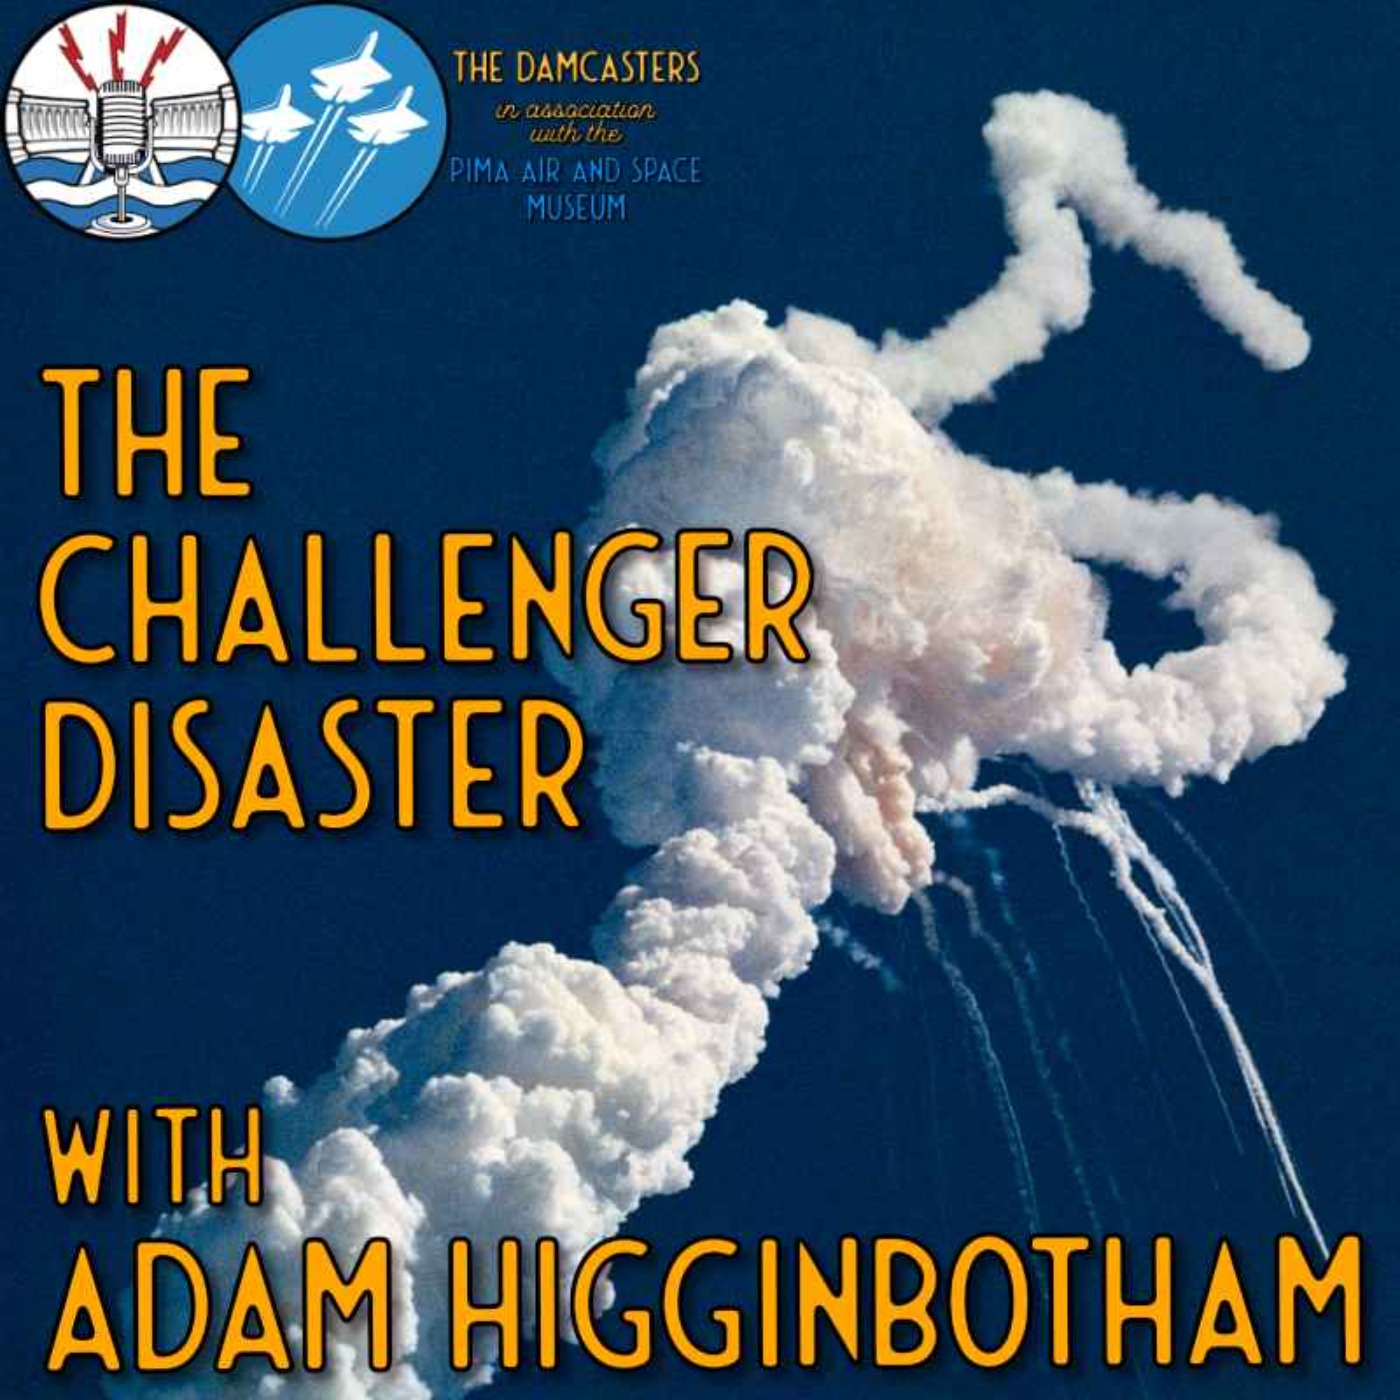 The Challenger Disaster with Adam Higginbotham